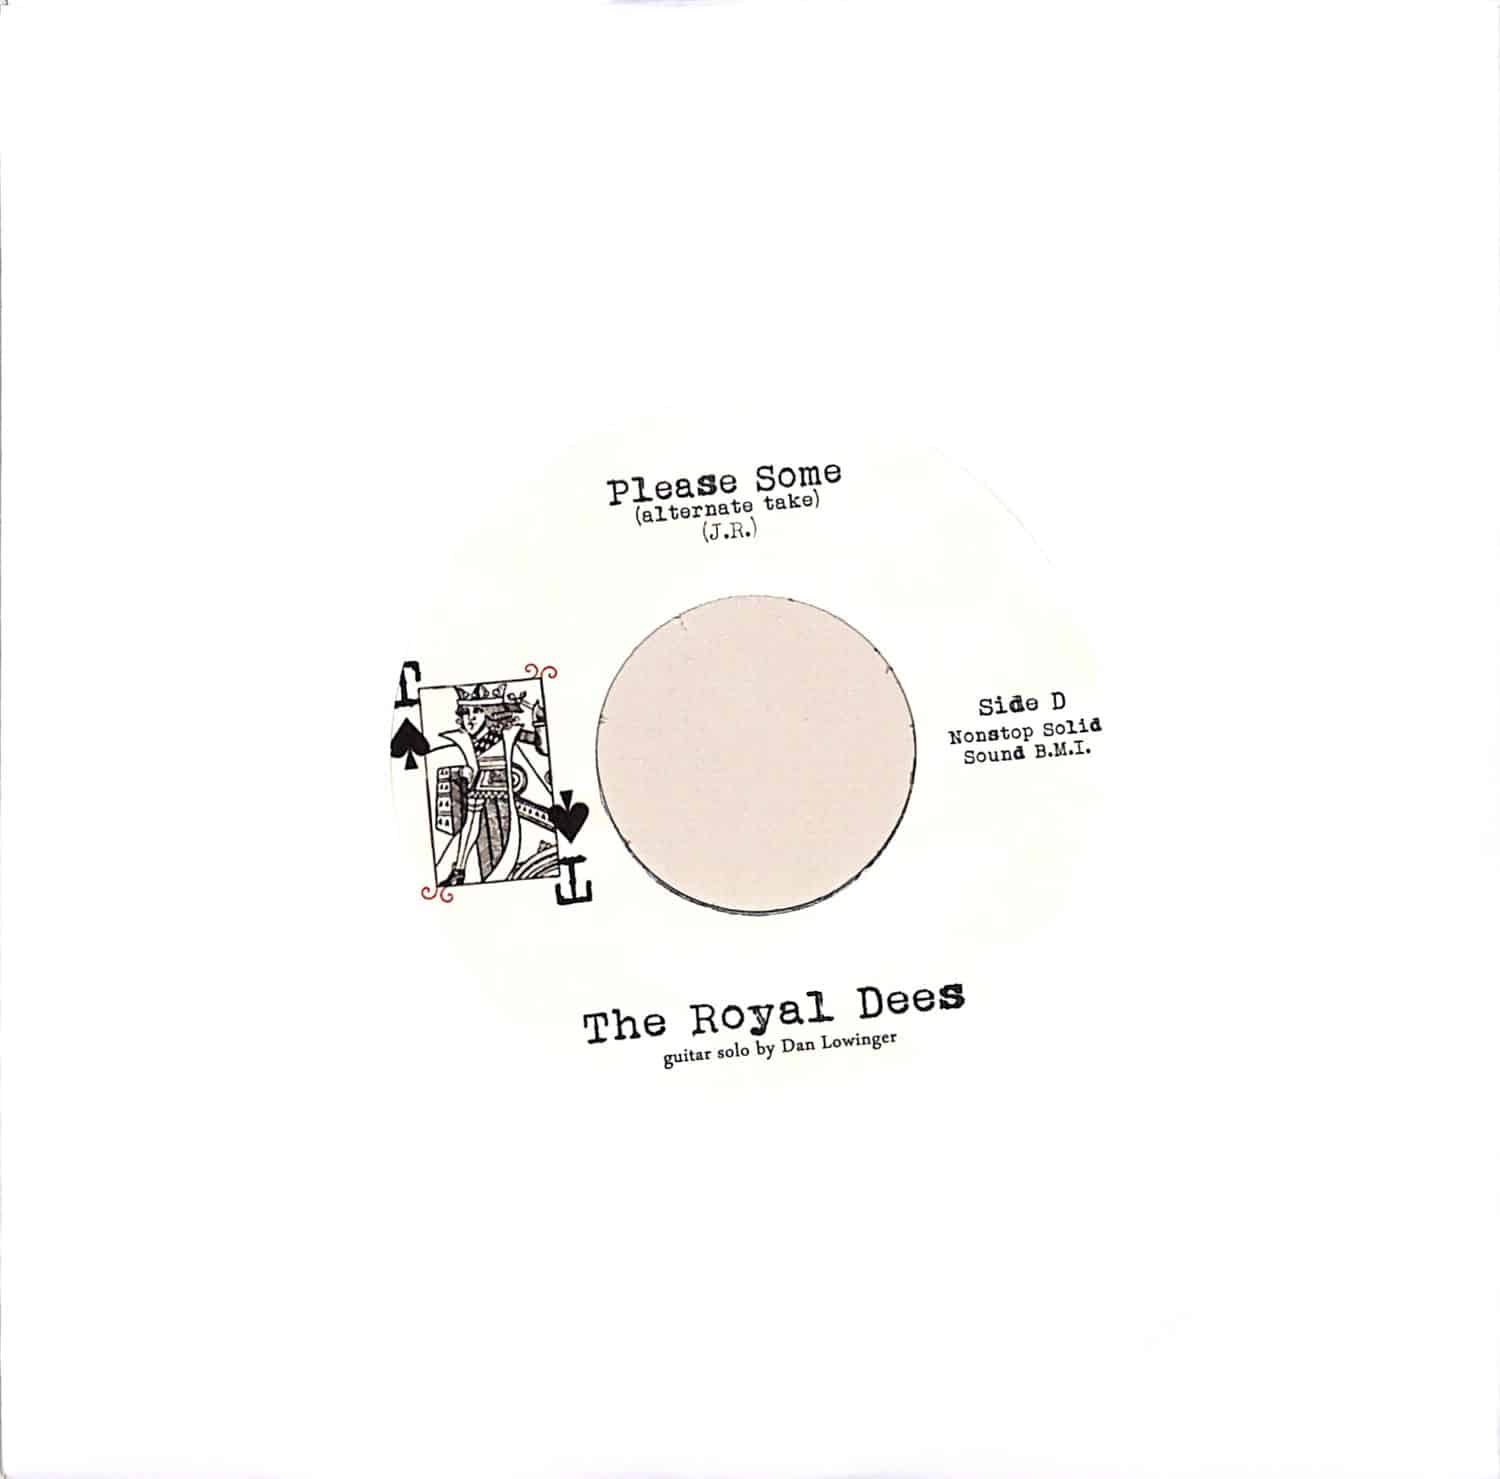 The Royal Dees - PLEASE SOME 